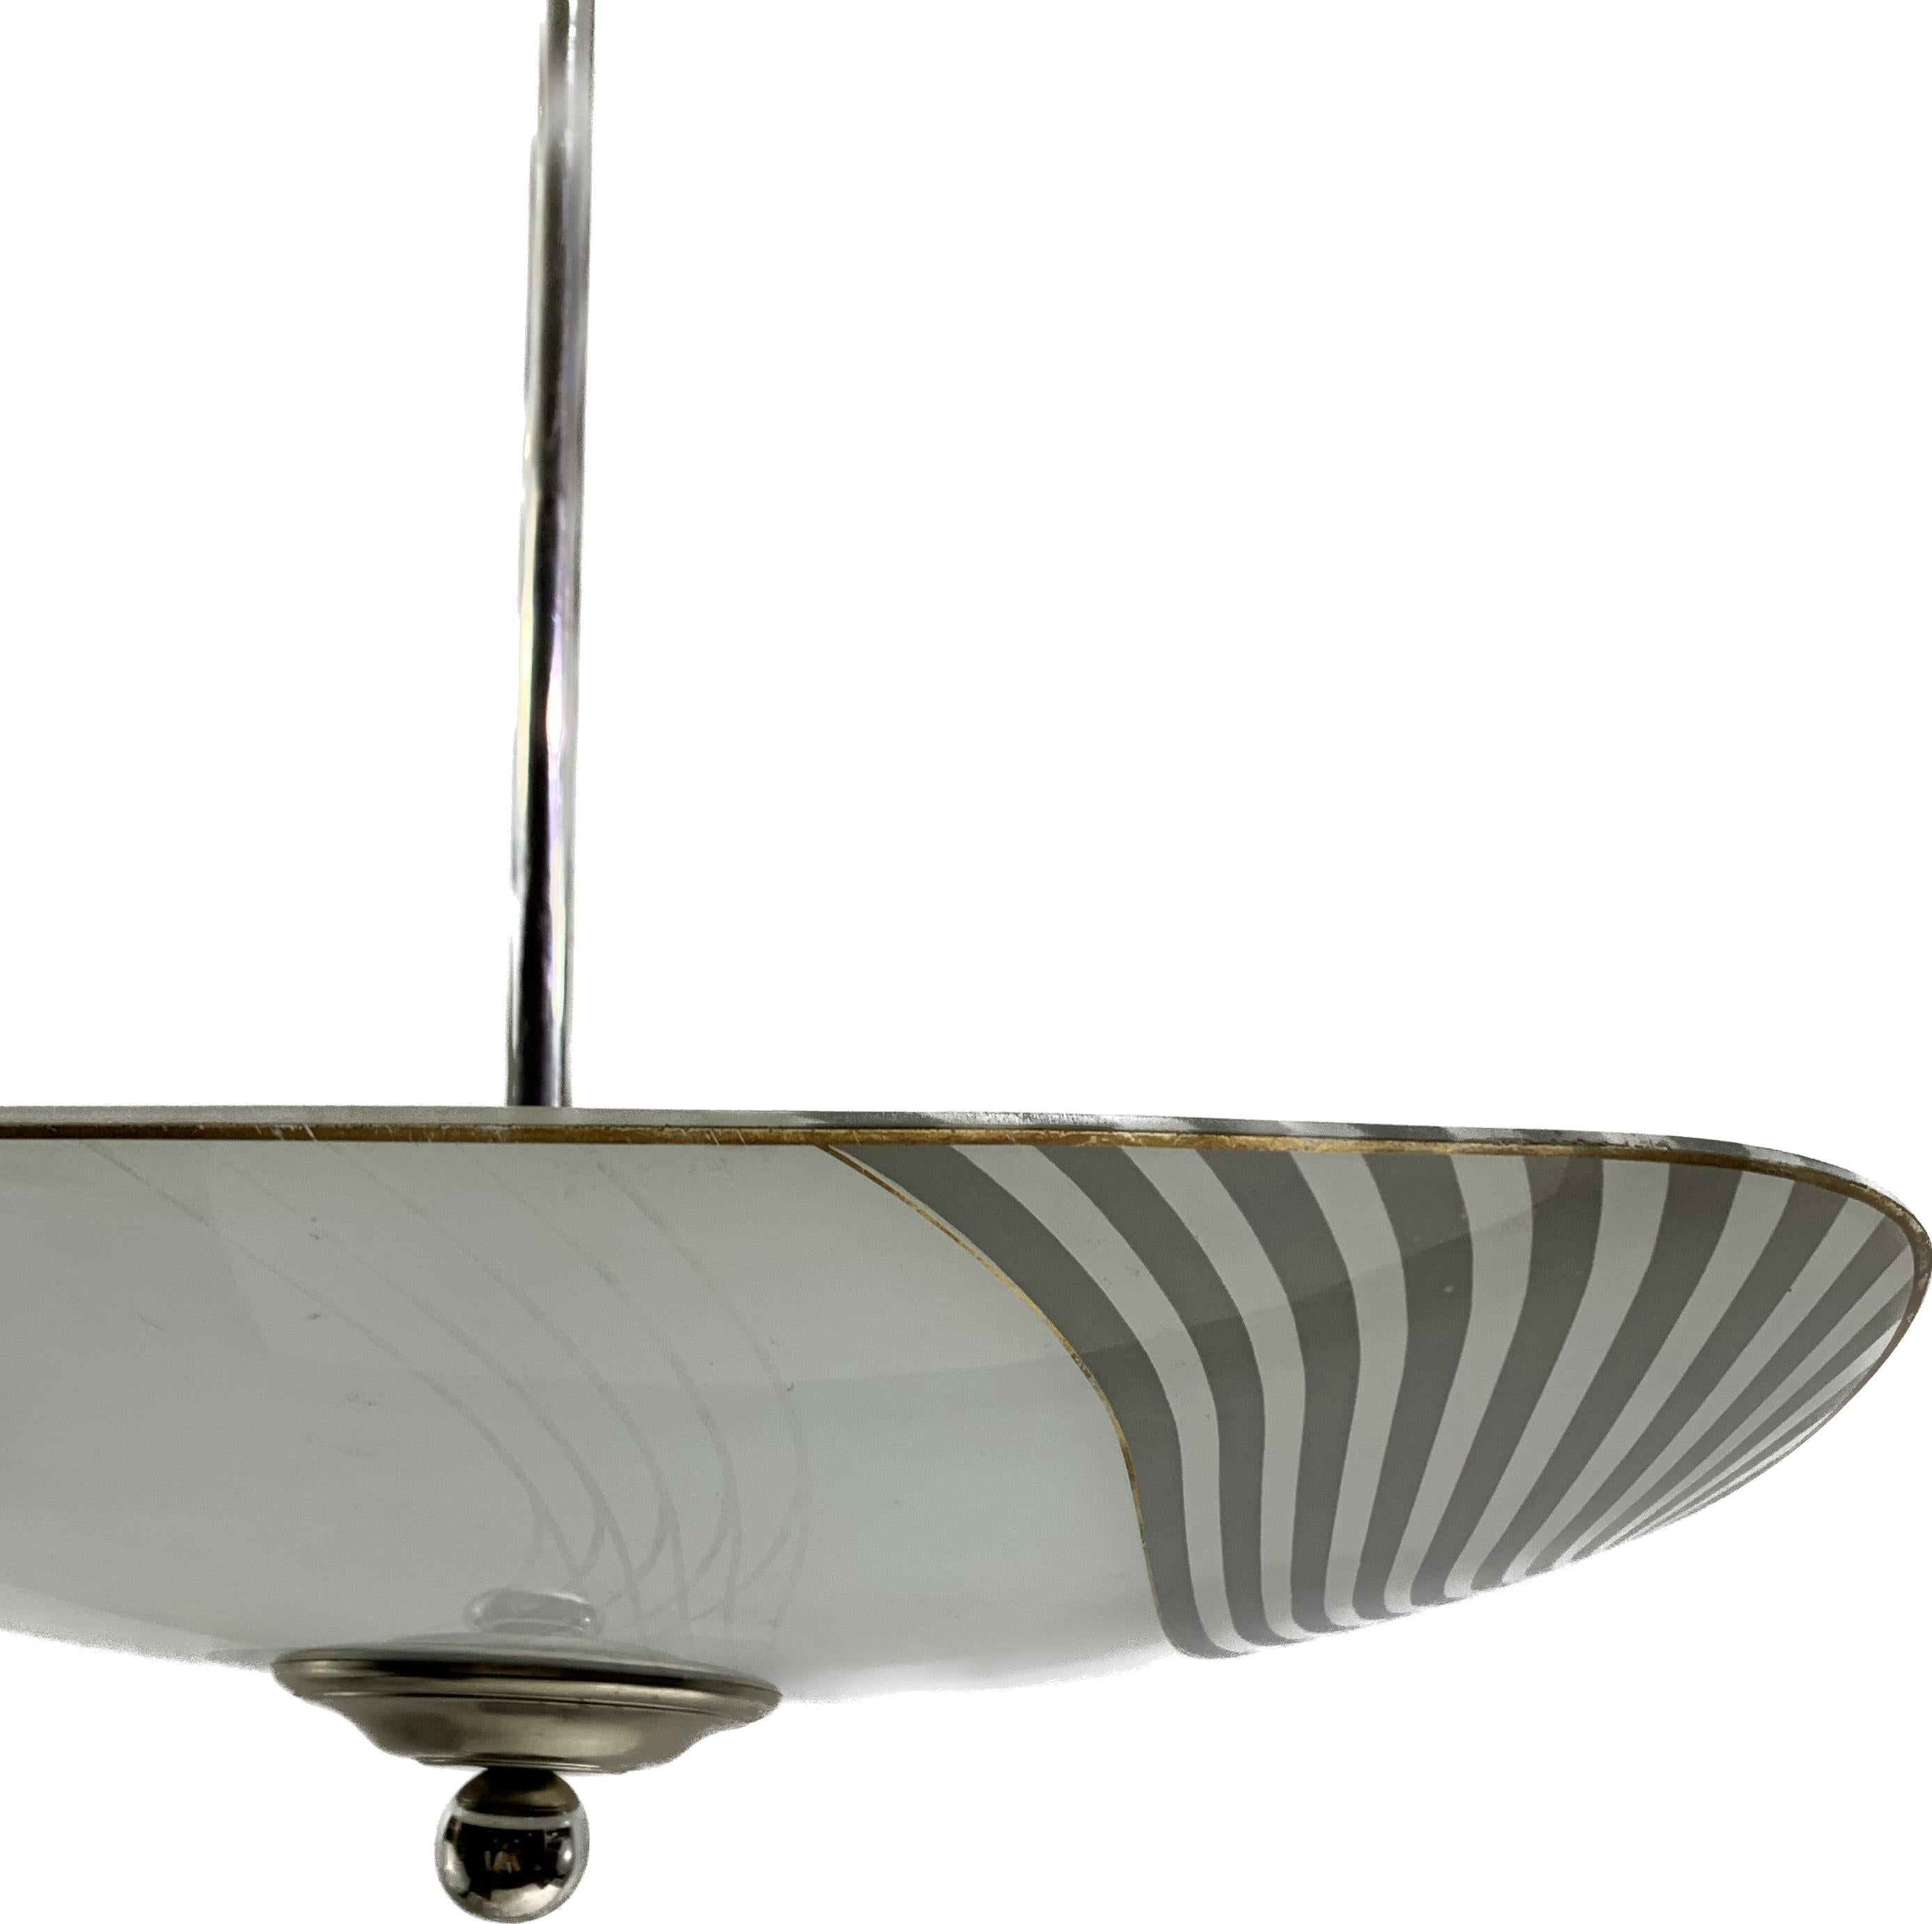 French Art Deco modernist pendant light. The structure is in nickel plated metal. The glassware has black drawings, representing geometric wavy patterns all around the lampshade. This pendant light is typical of the modernists’ Art Deco Movement, it